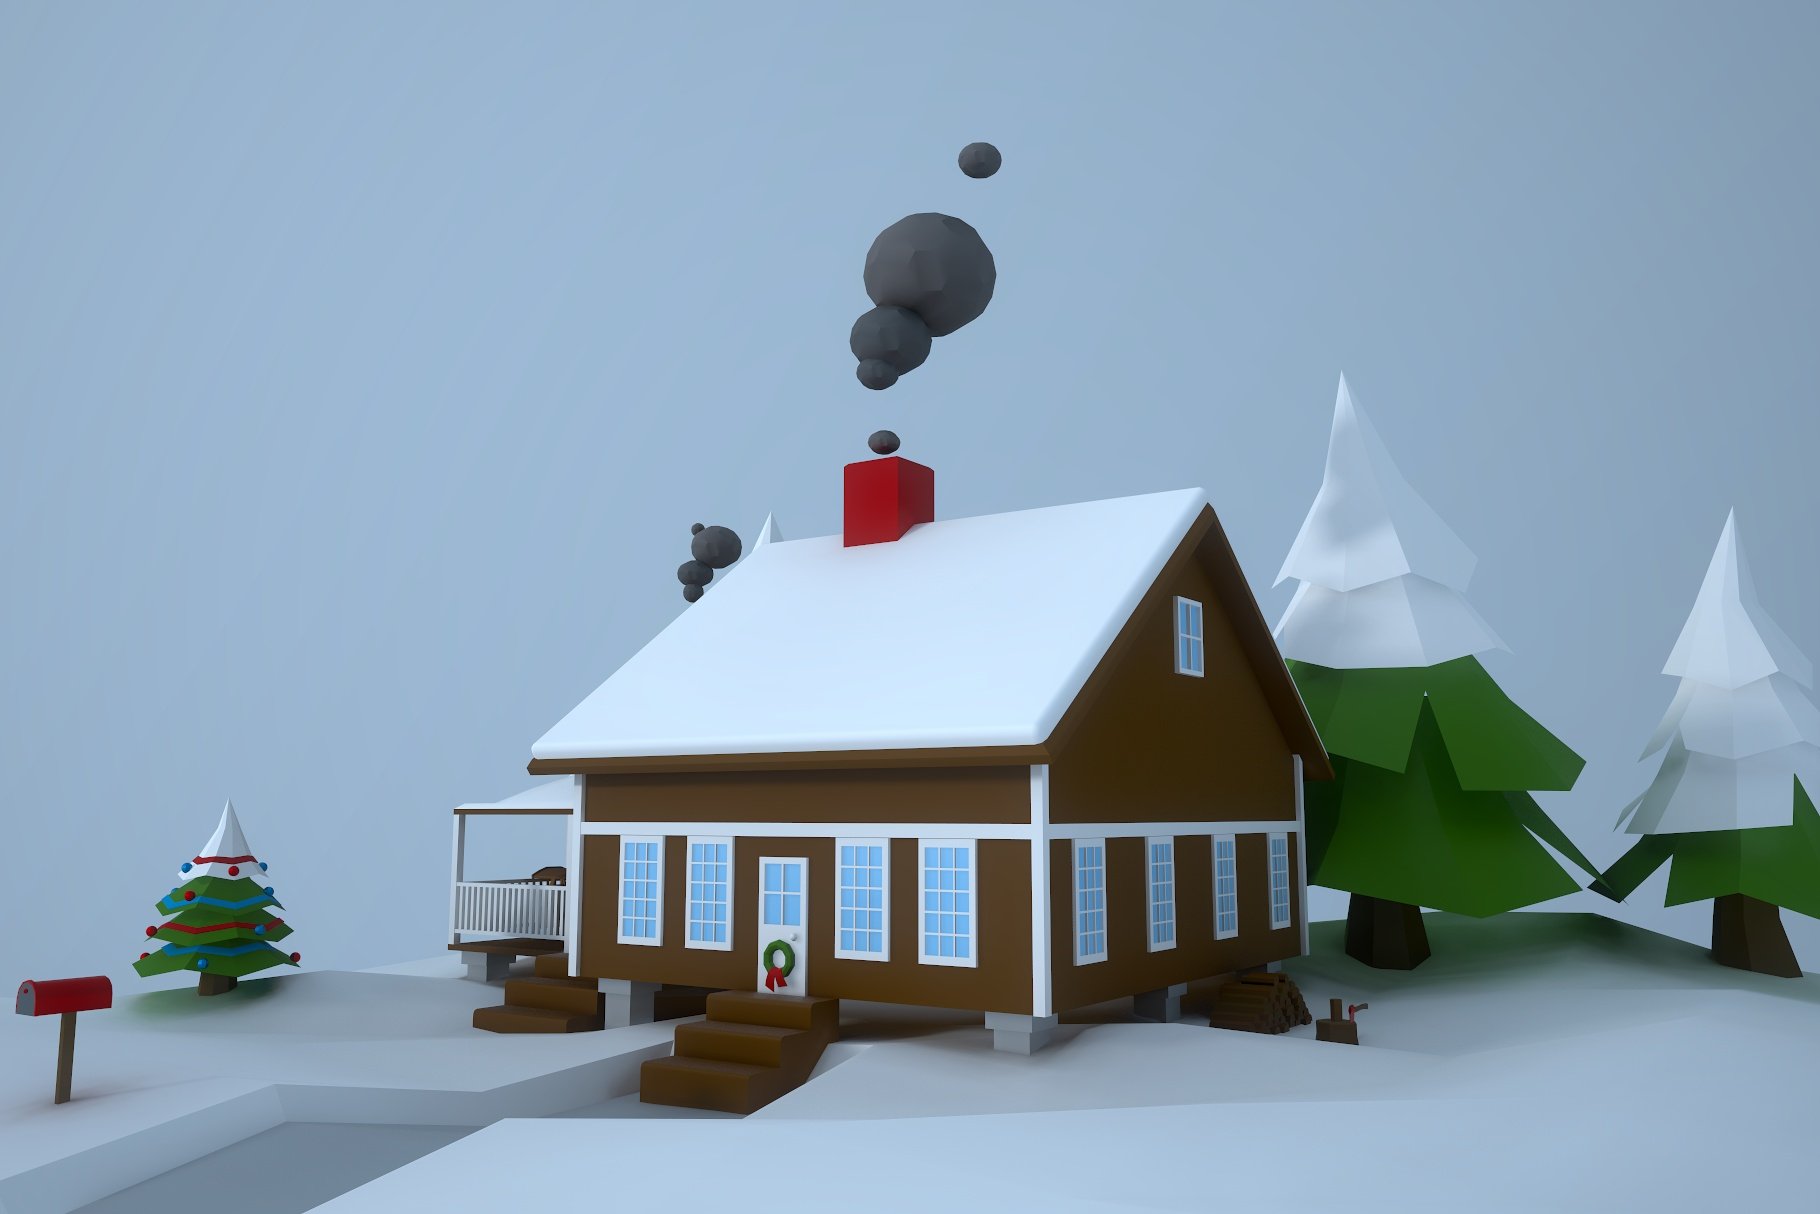 Low poly house back mockup on the left side.